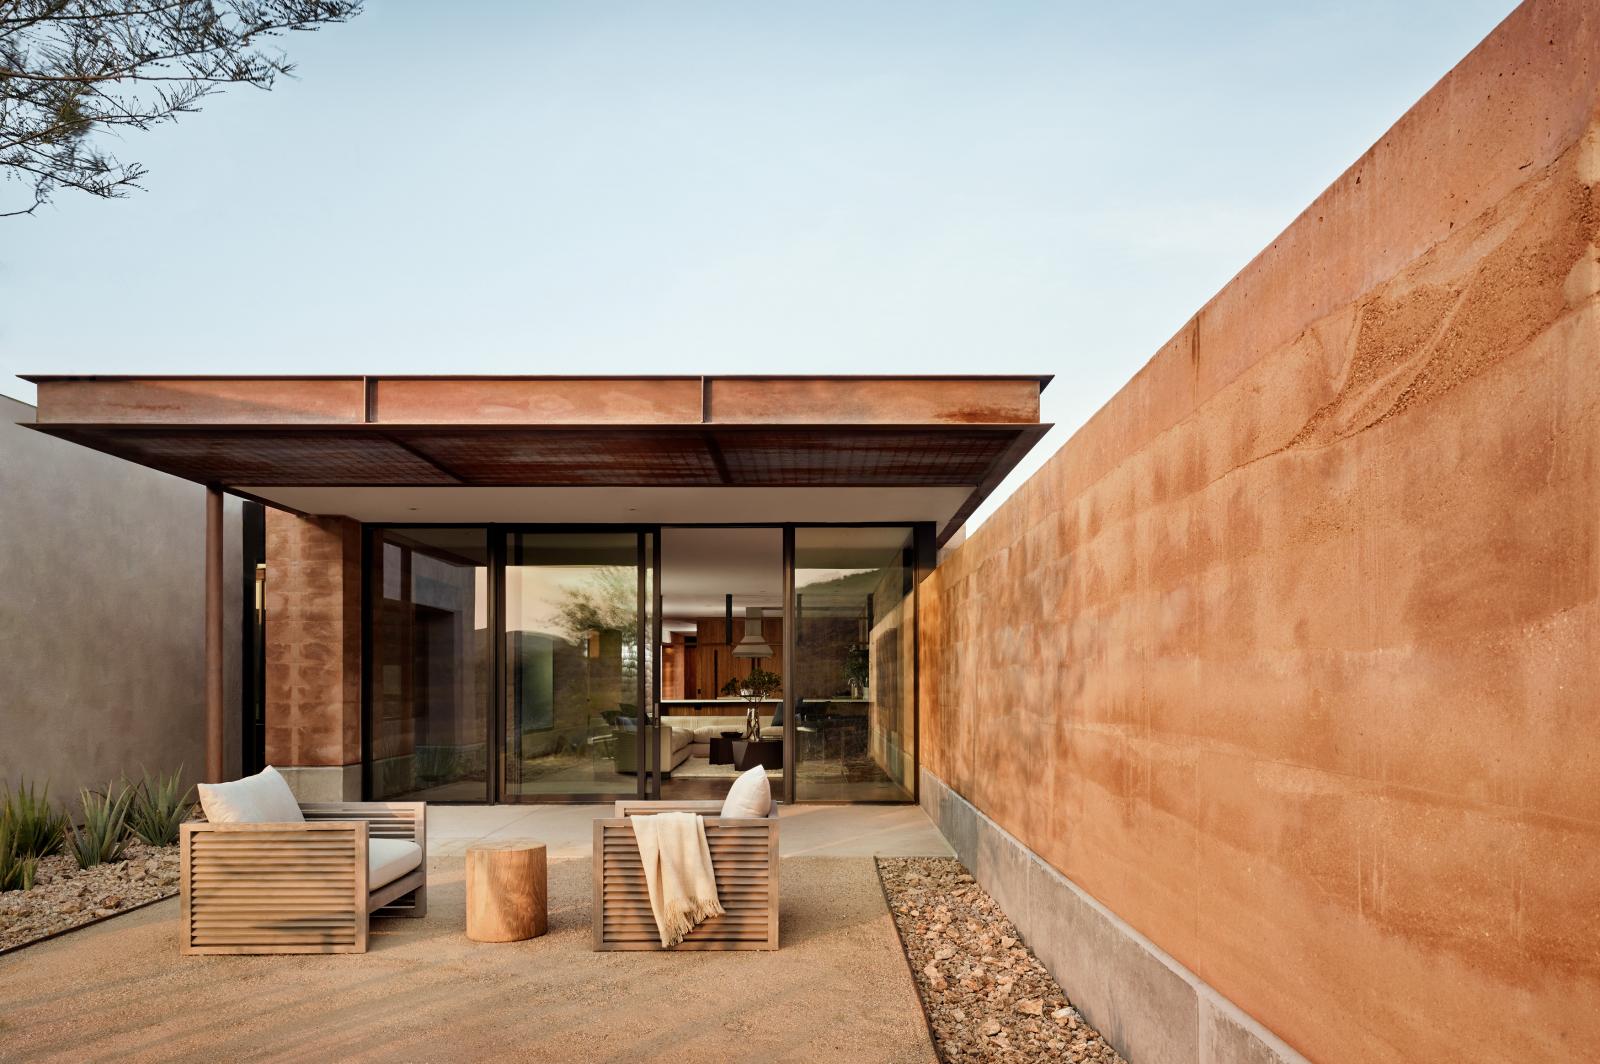 The rammed earth walls create outstretched wings that frame a private landscape while blocking the intense west exposure and northern winter winds.